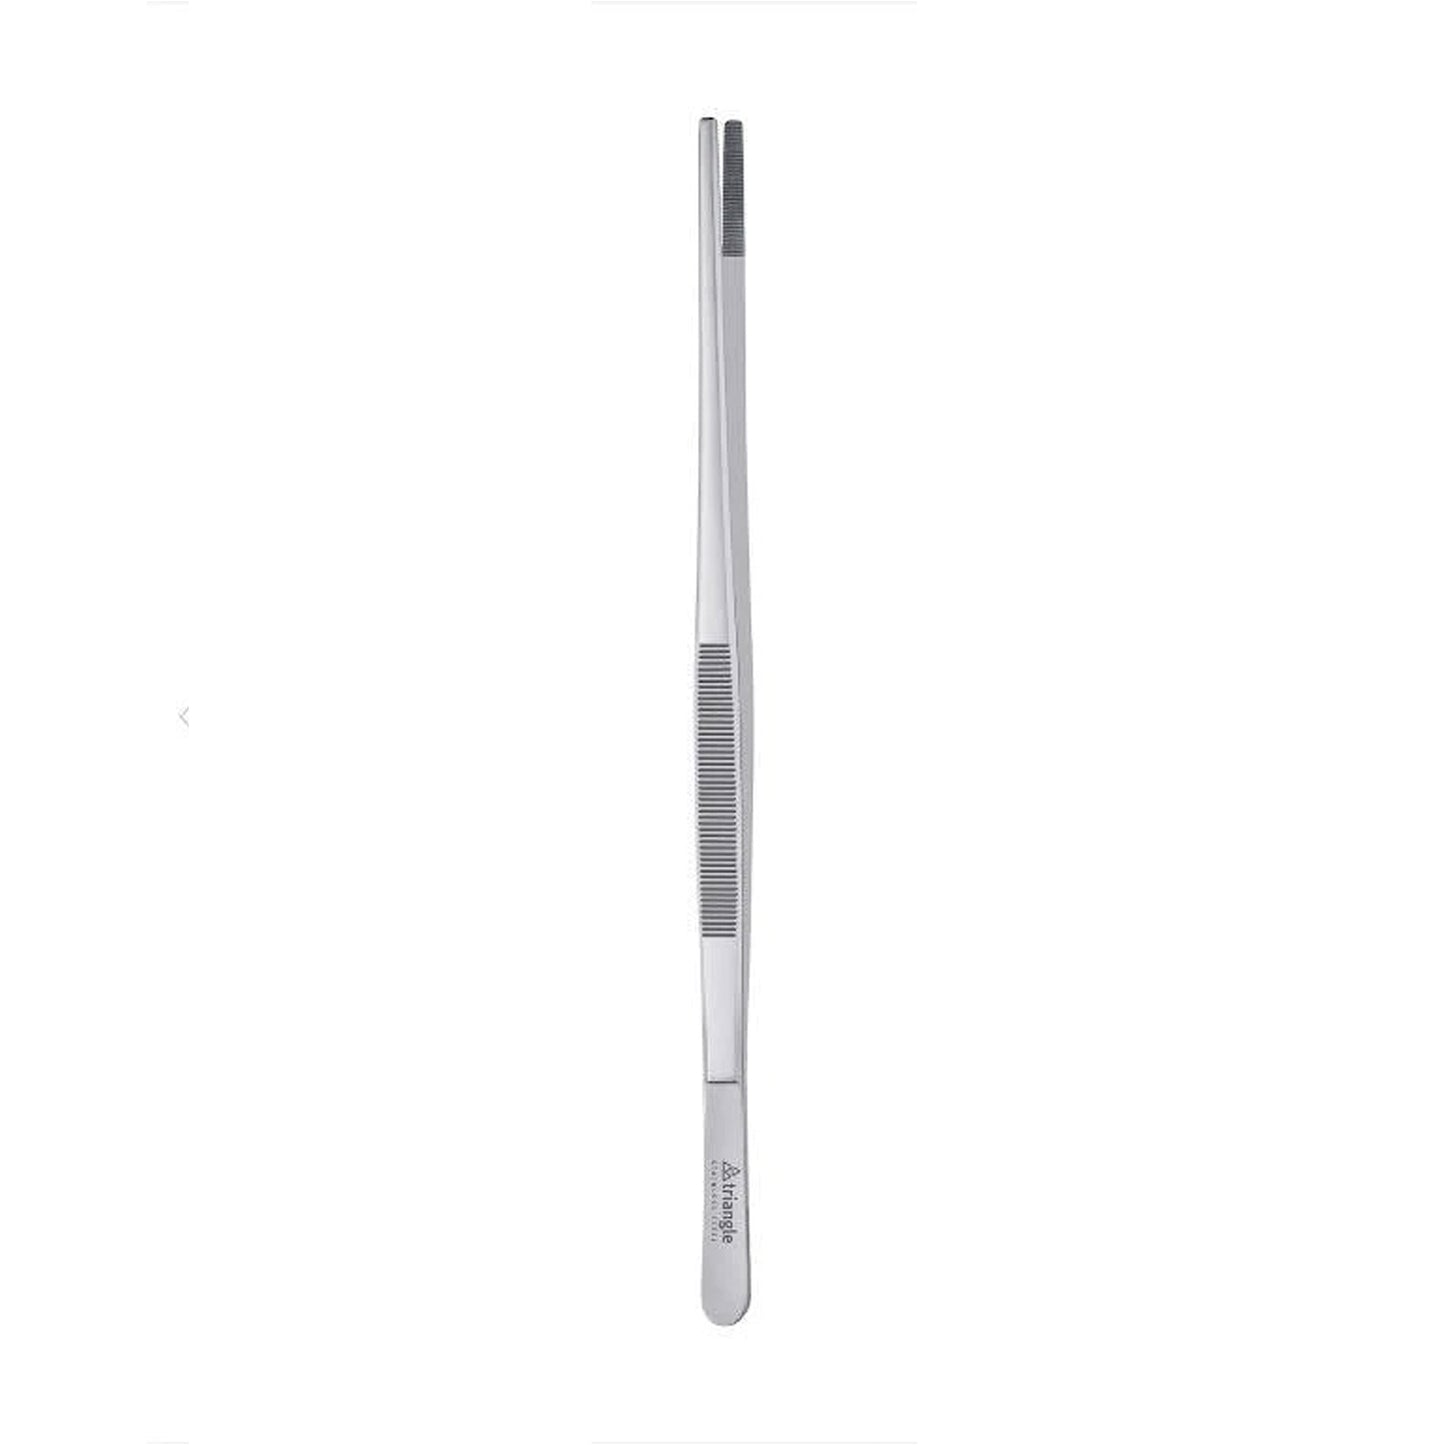 [Triangle] Barbecue Tweezers 35cm / 14in